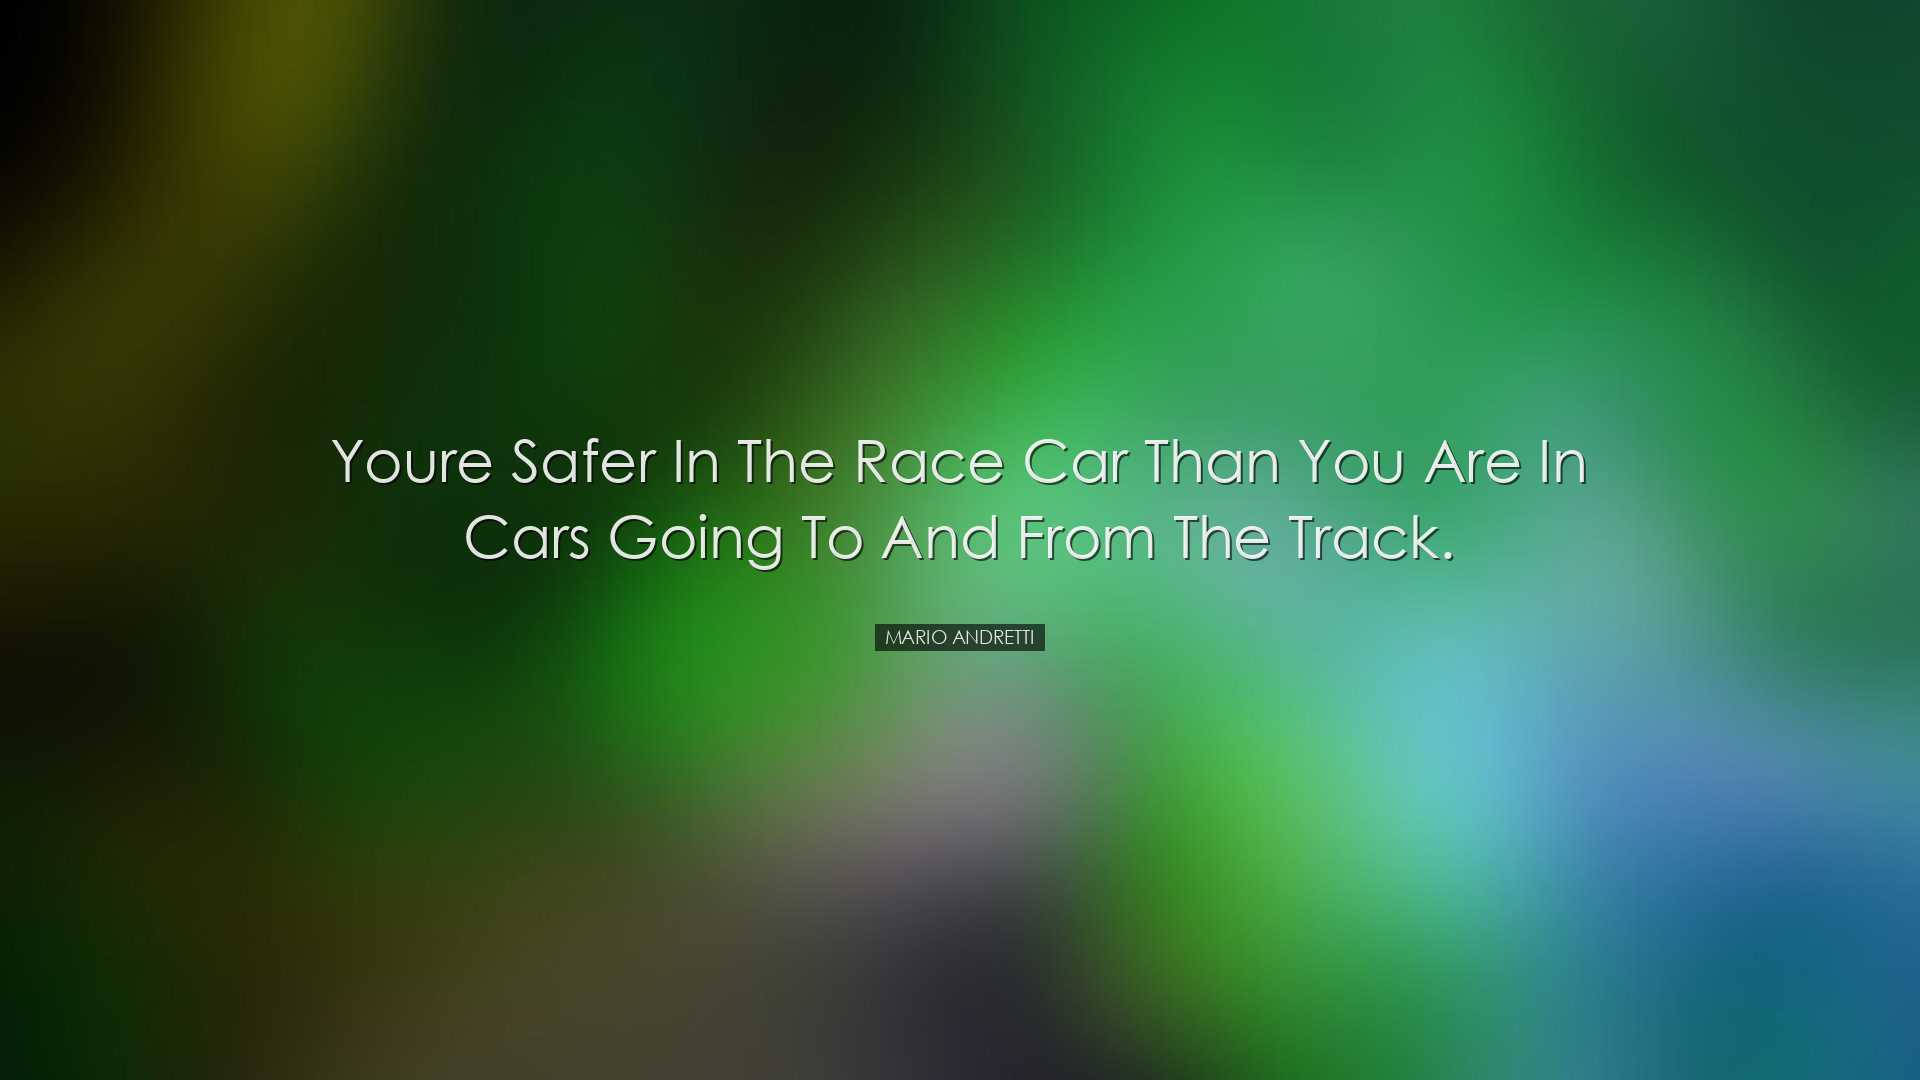 Youre safer in the race car than you are in cars going to and from